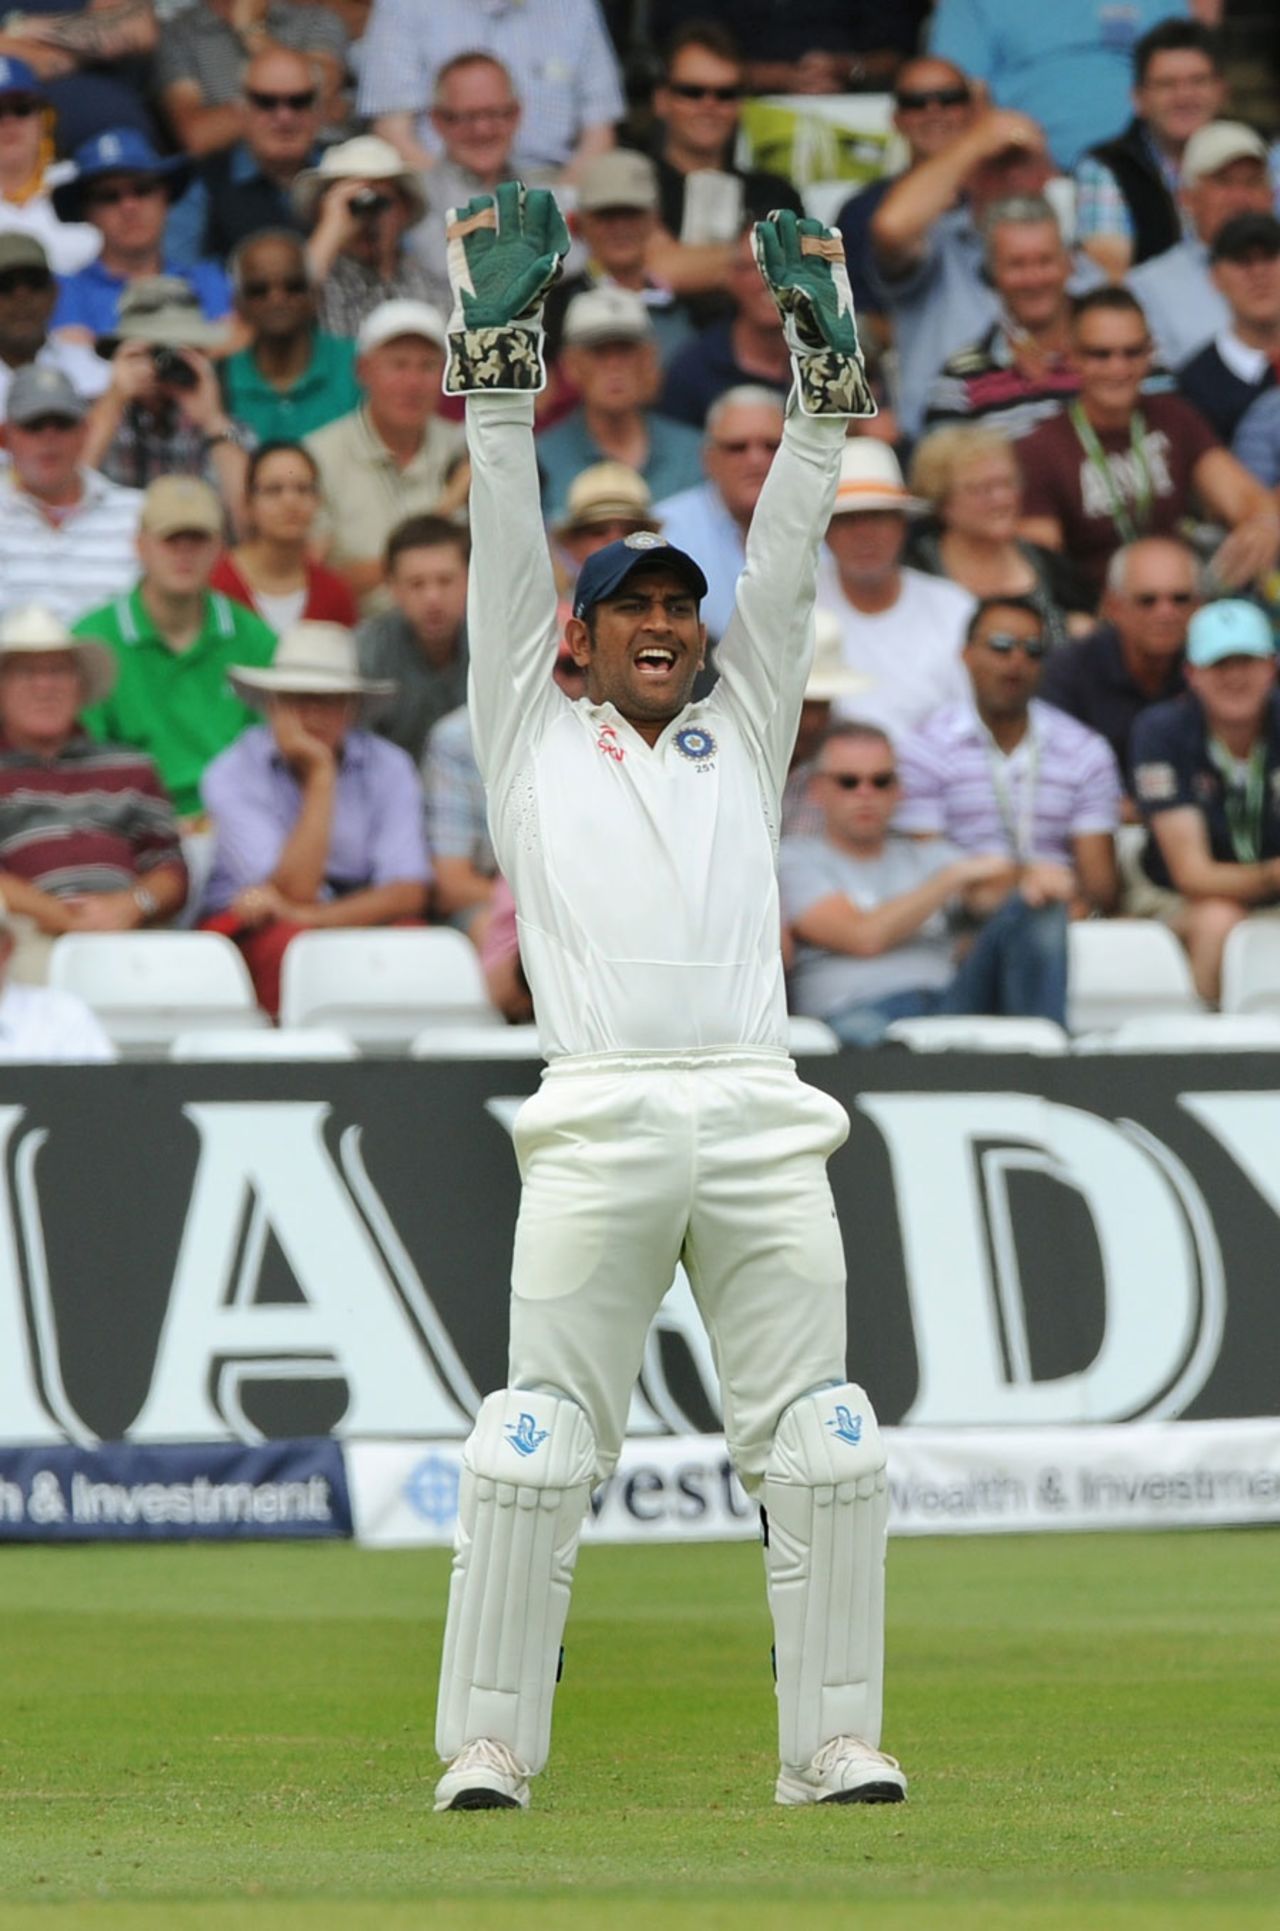 MS Dhoni appeals behind the wicket, England v India, 1st Investec Test, Trent Bridge, 3rd day, July 11, 2014